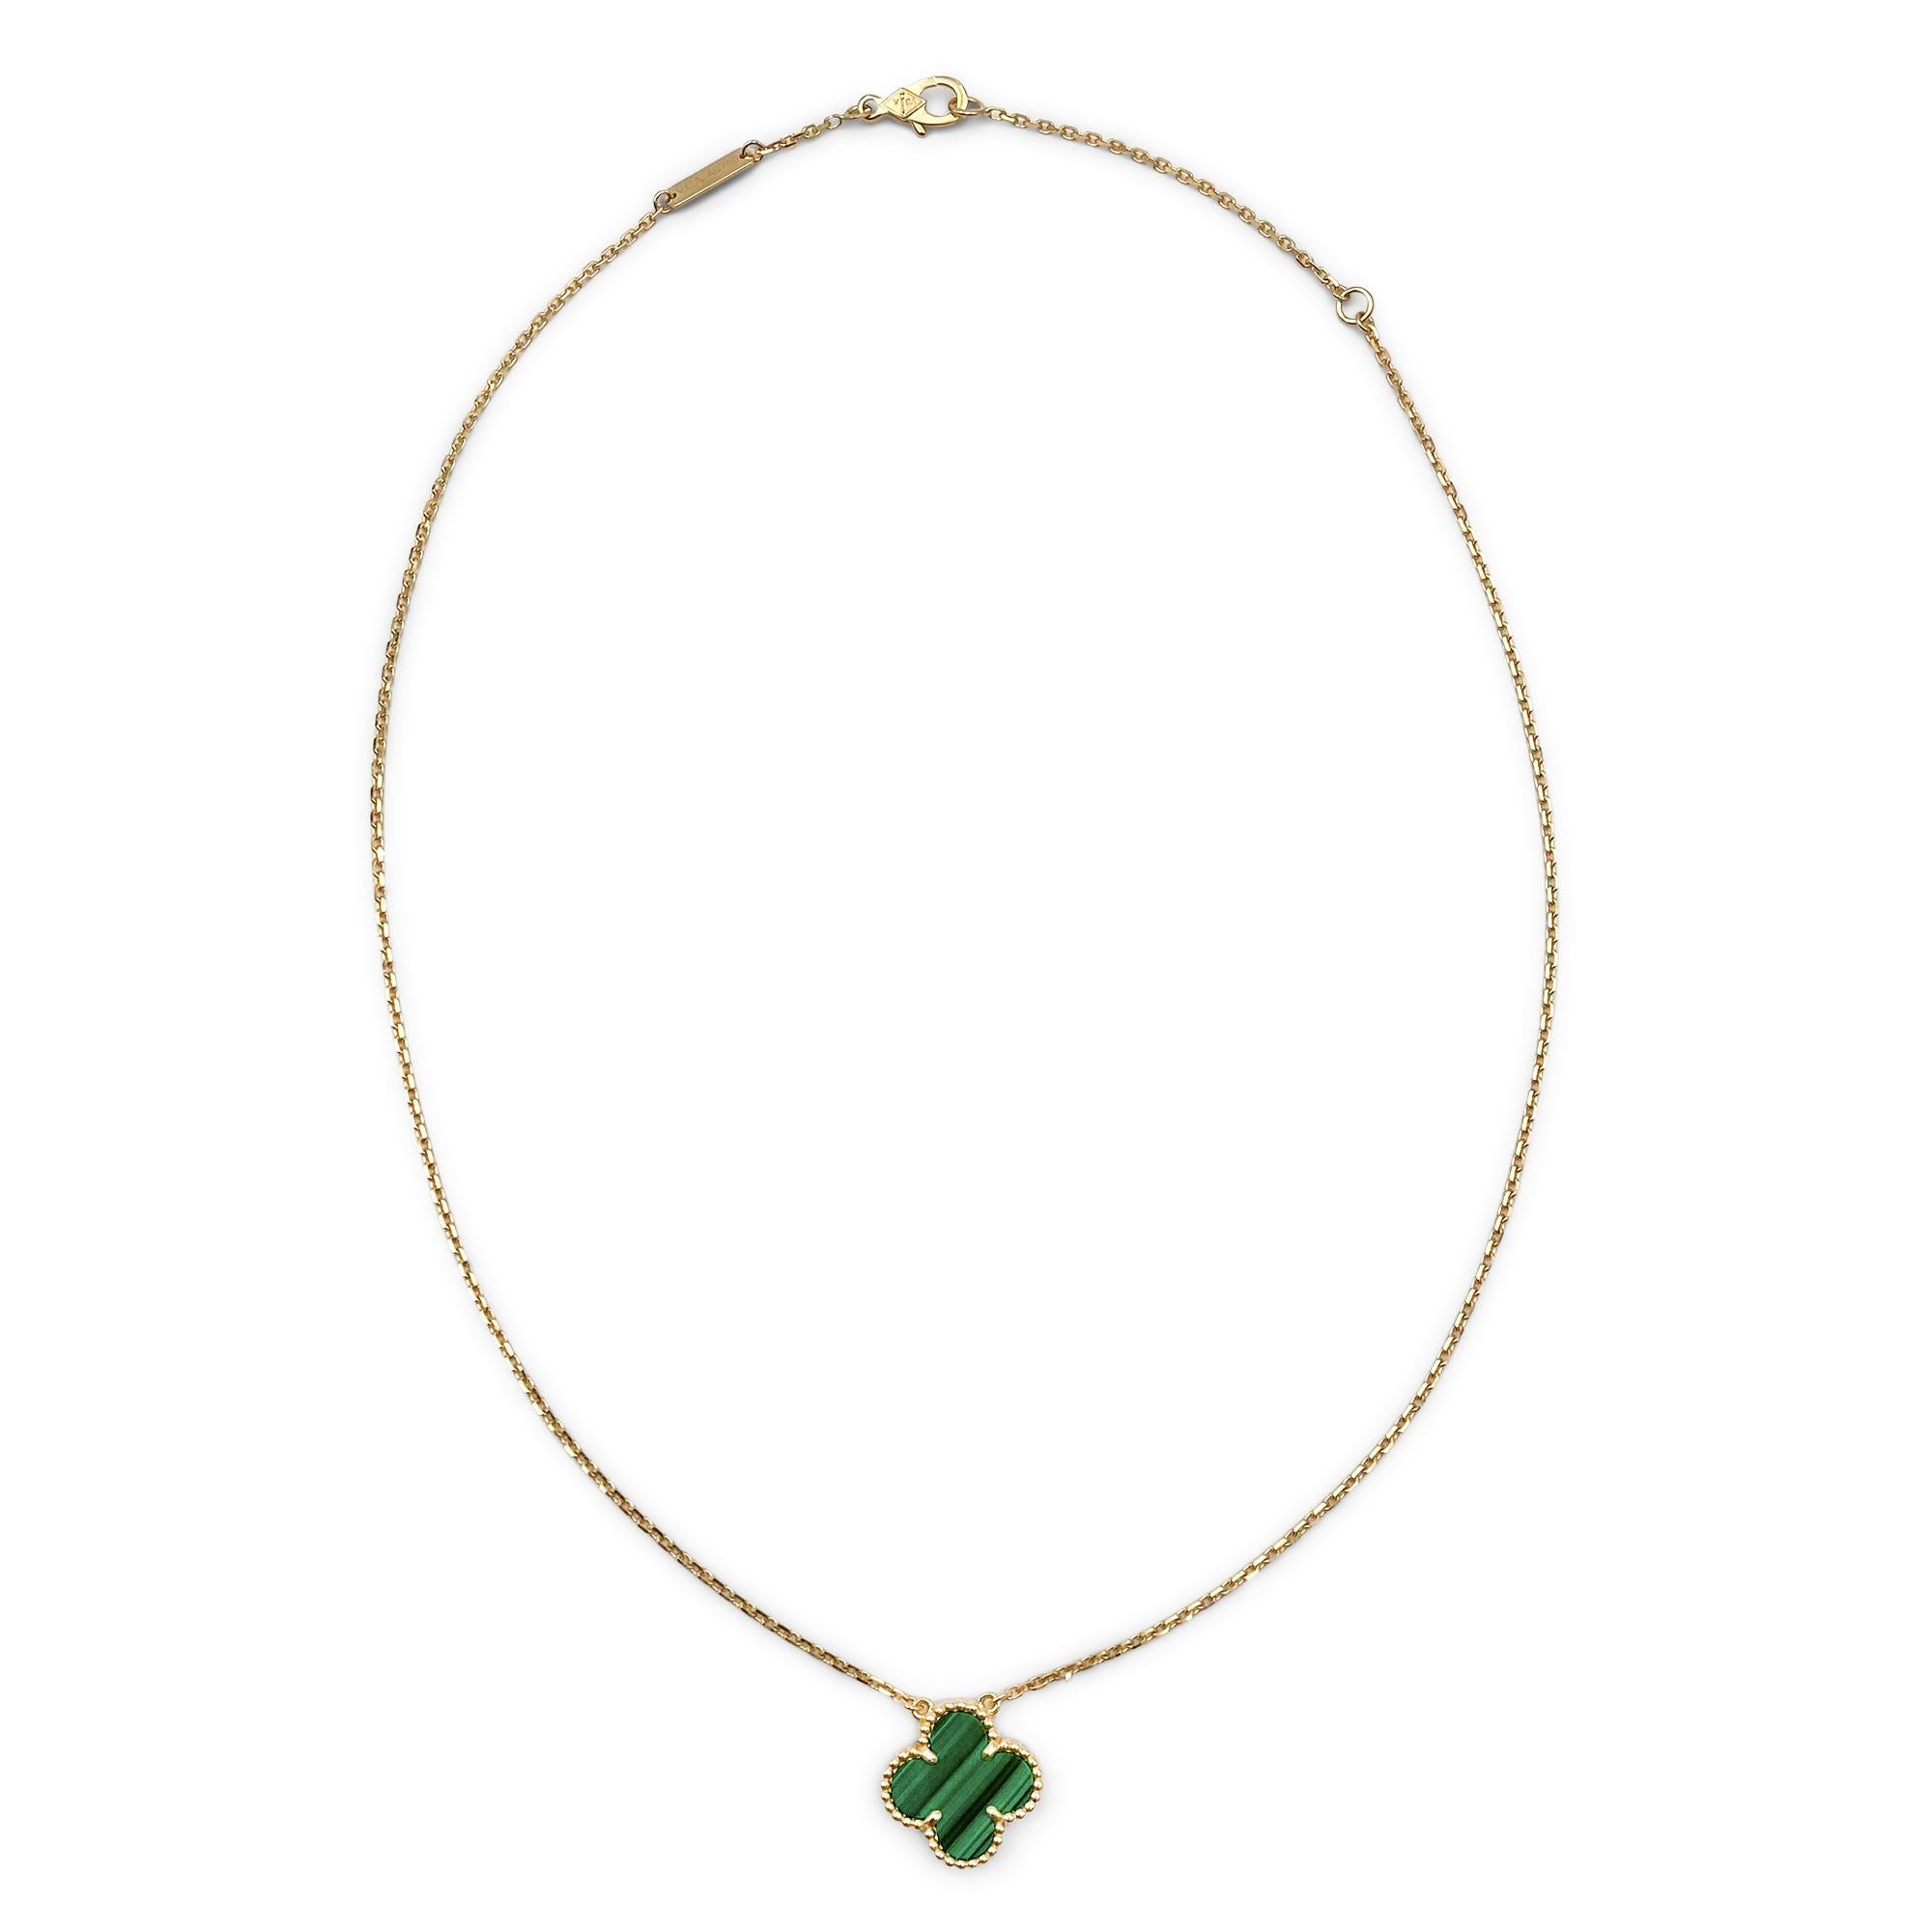 Authentic Van Cleef & Arpels 'Vintage Alhambra' necklace crafted in 18 karat yellow gold and featuring one clover-shaped motif in carved malachite. The pendant hangs from a 16 1/2 inch adjustable chain.  Signed VCA, Au750, with serial number and